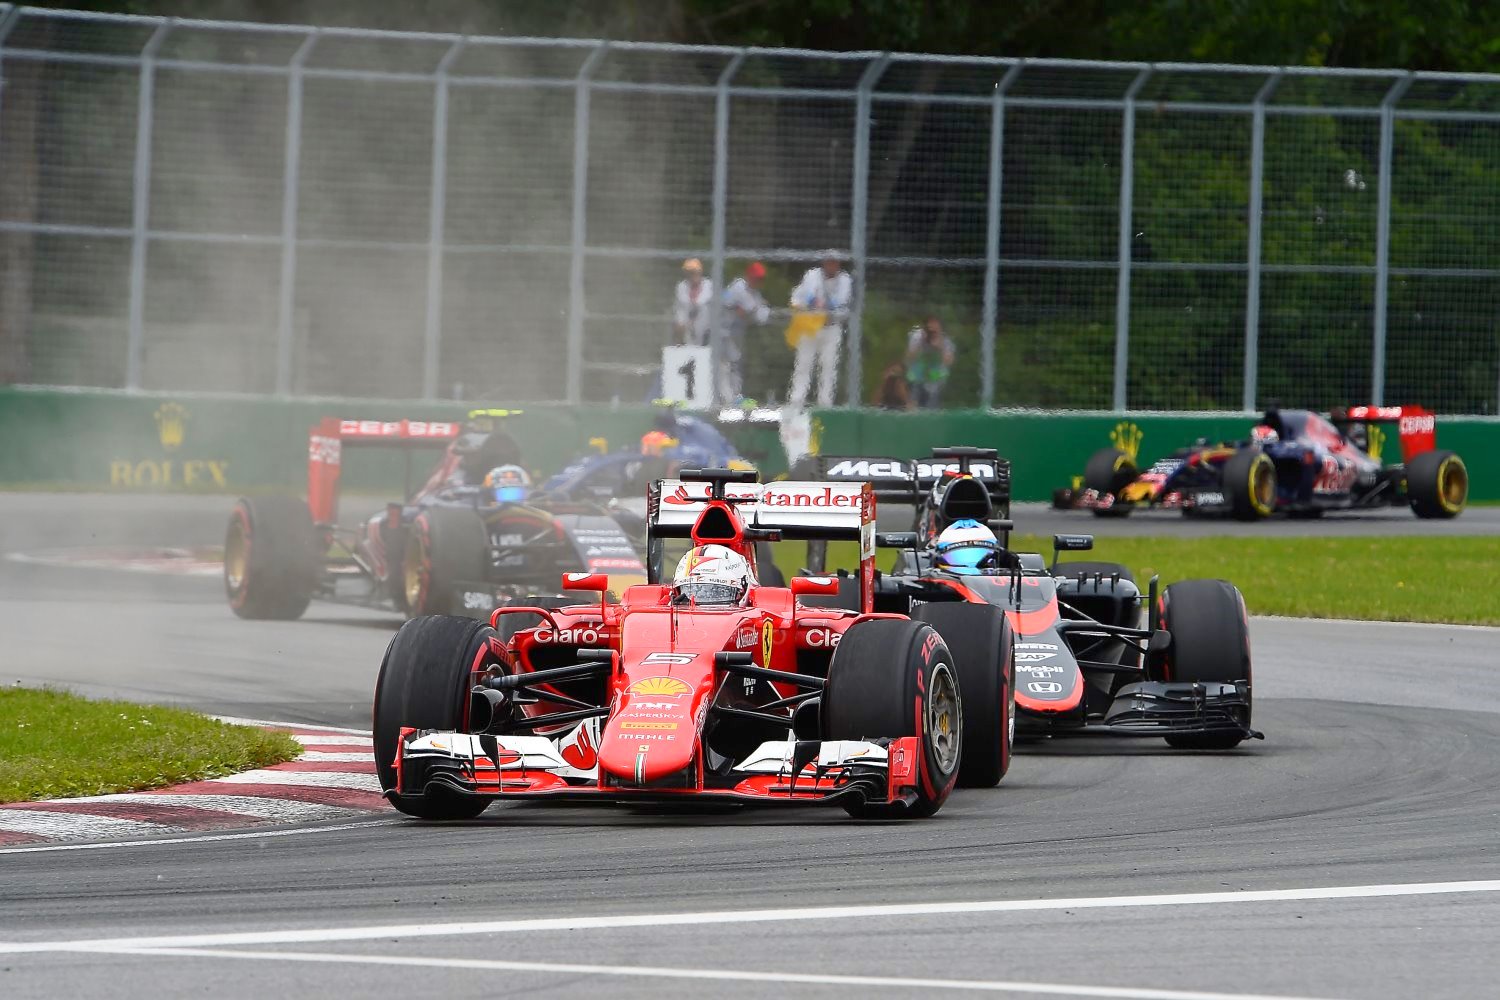 Vettel smoked Alonso not once, but twice